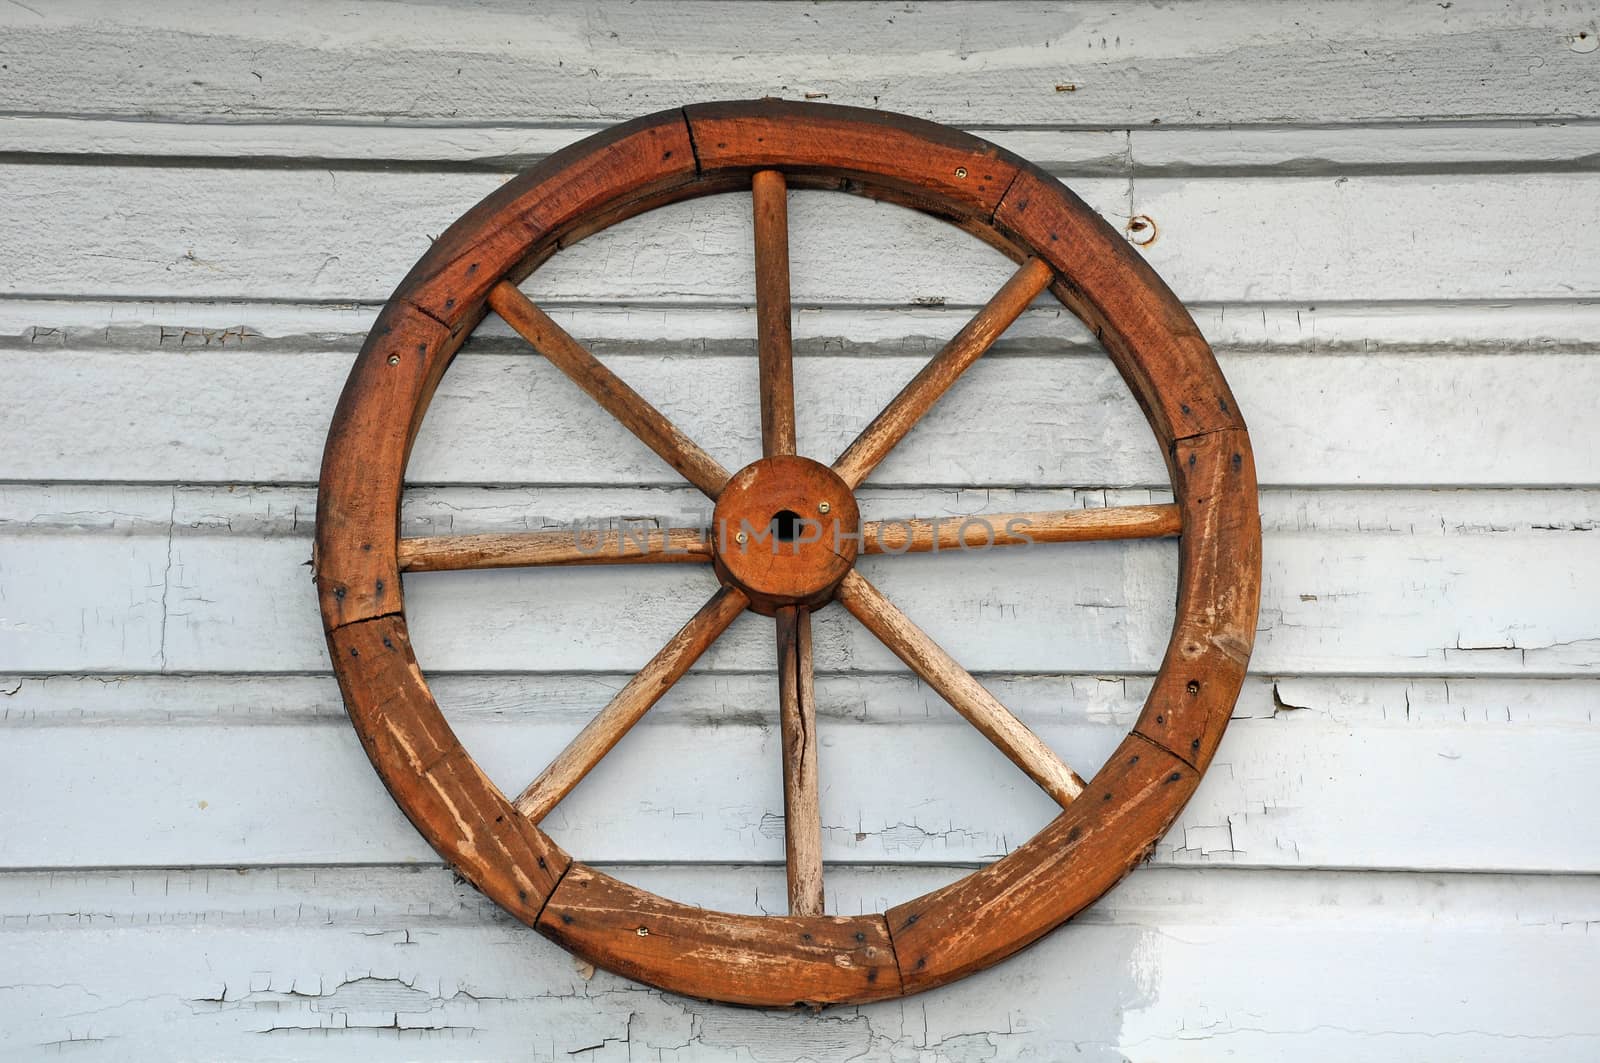 Old weathered wagon wheel by ingperl